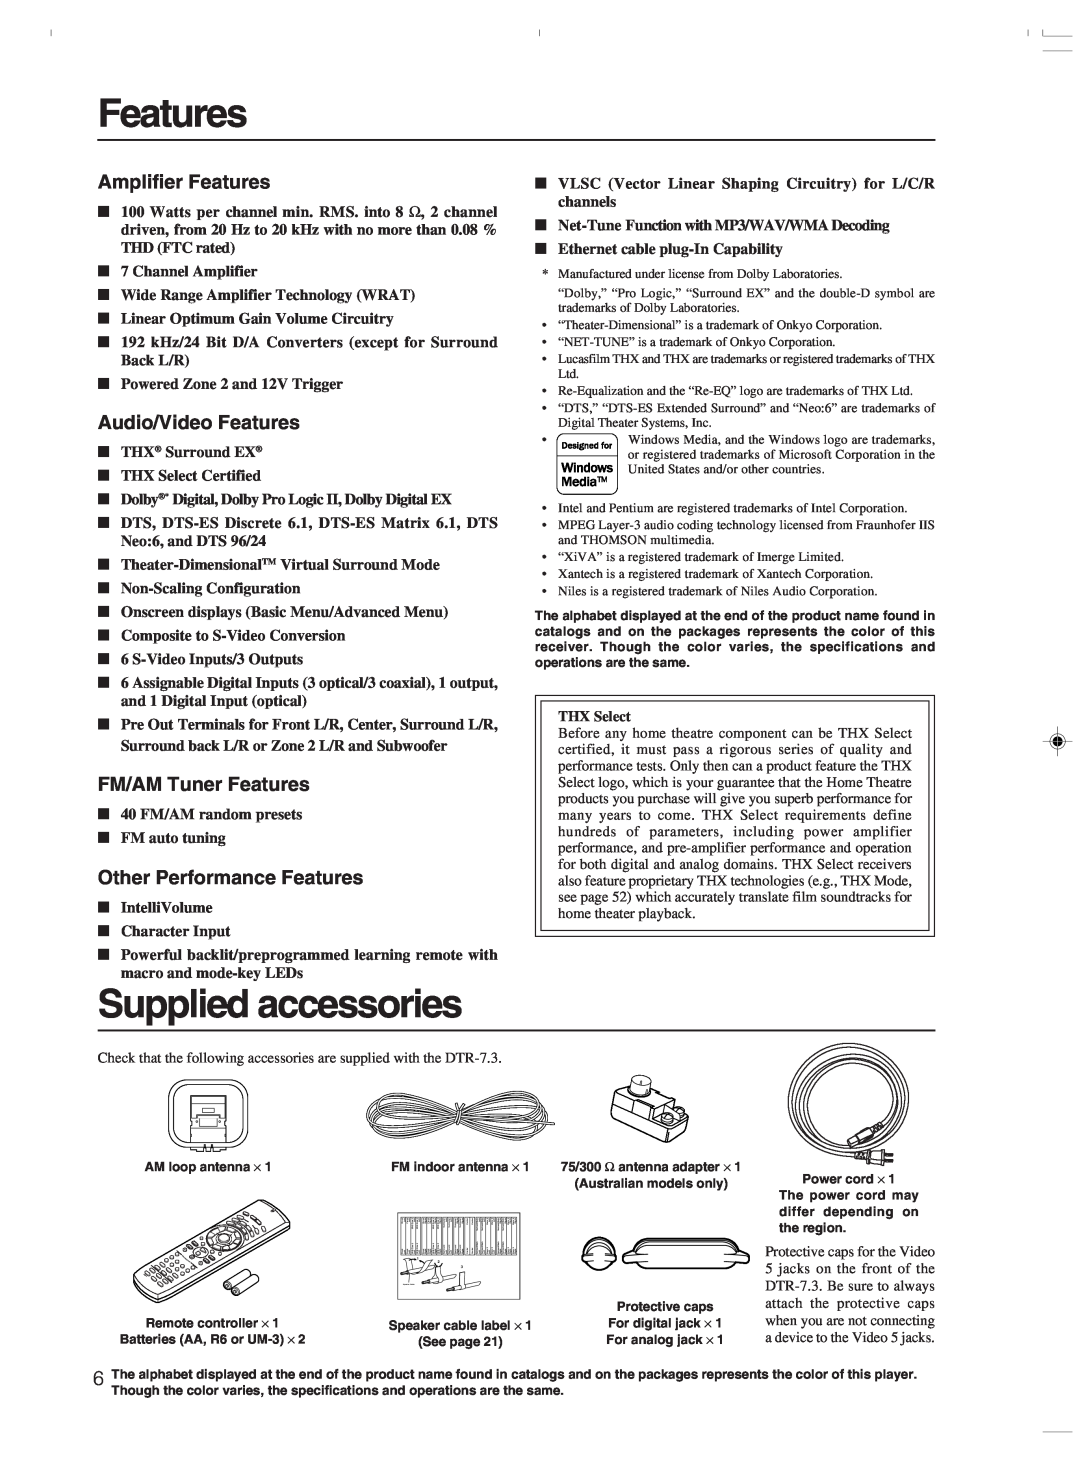 Integra DTR-7.3 instruction manual Supplied accessories, Amplifier Features, Audio/Video Features, FM/AM Tuner Features 